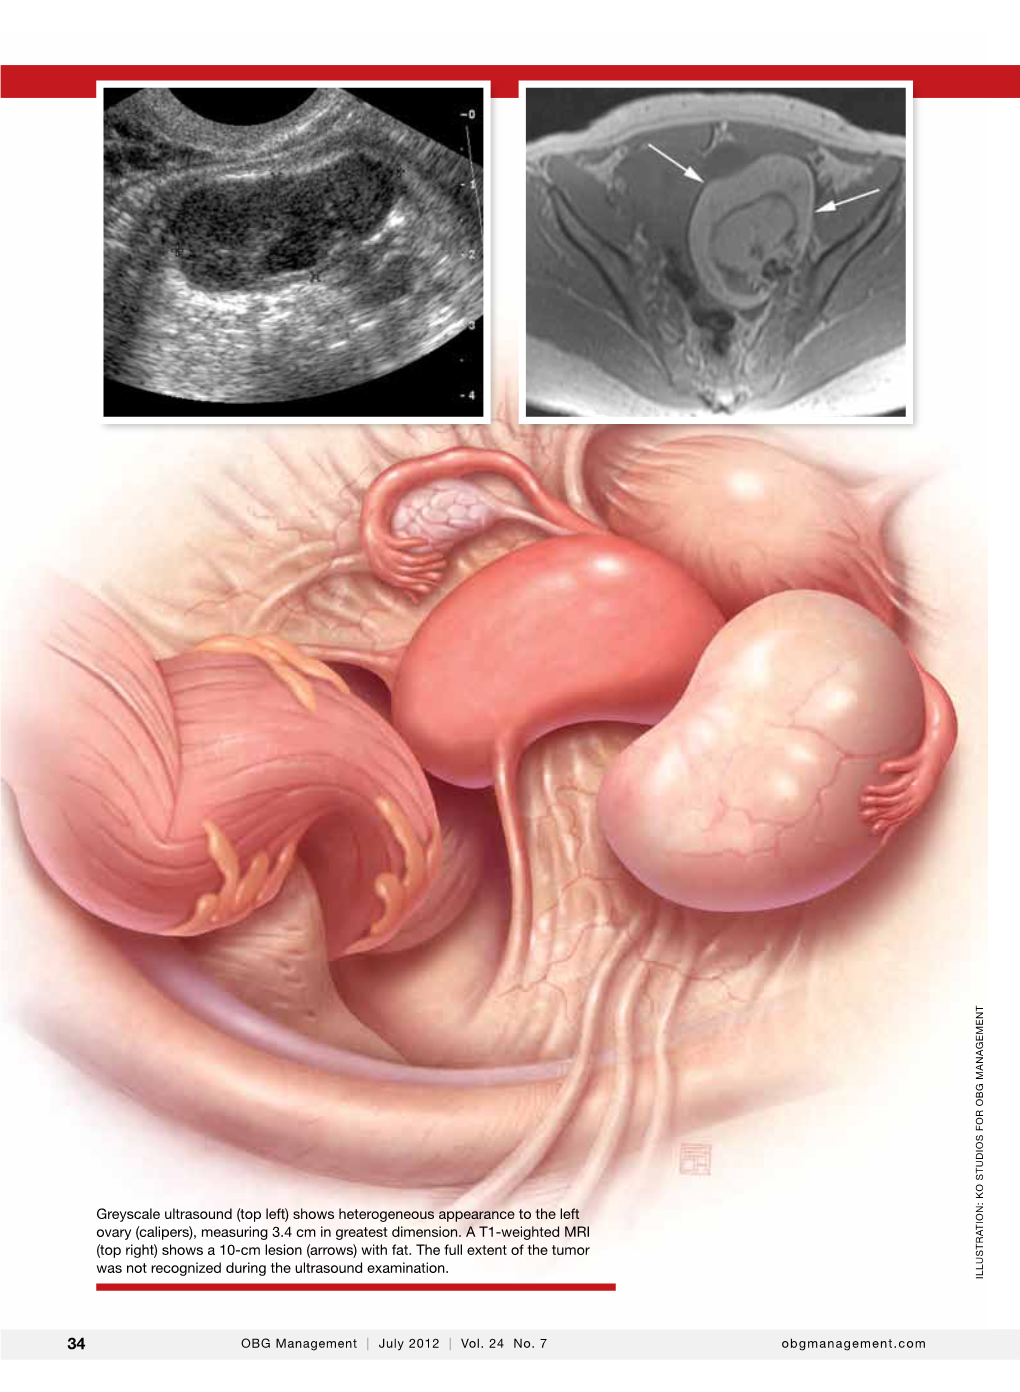 Shows Heterogeneous Appearance to the Left Ovary (Calipers), Measuring 3.4 Cm in Greatest Dimension